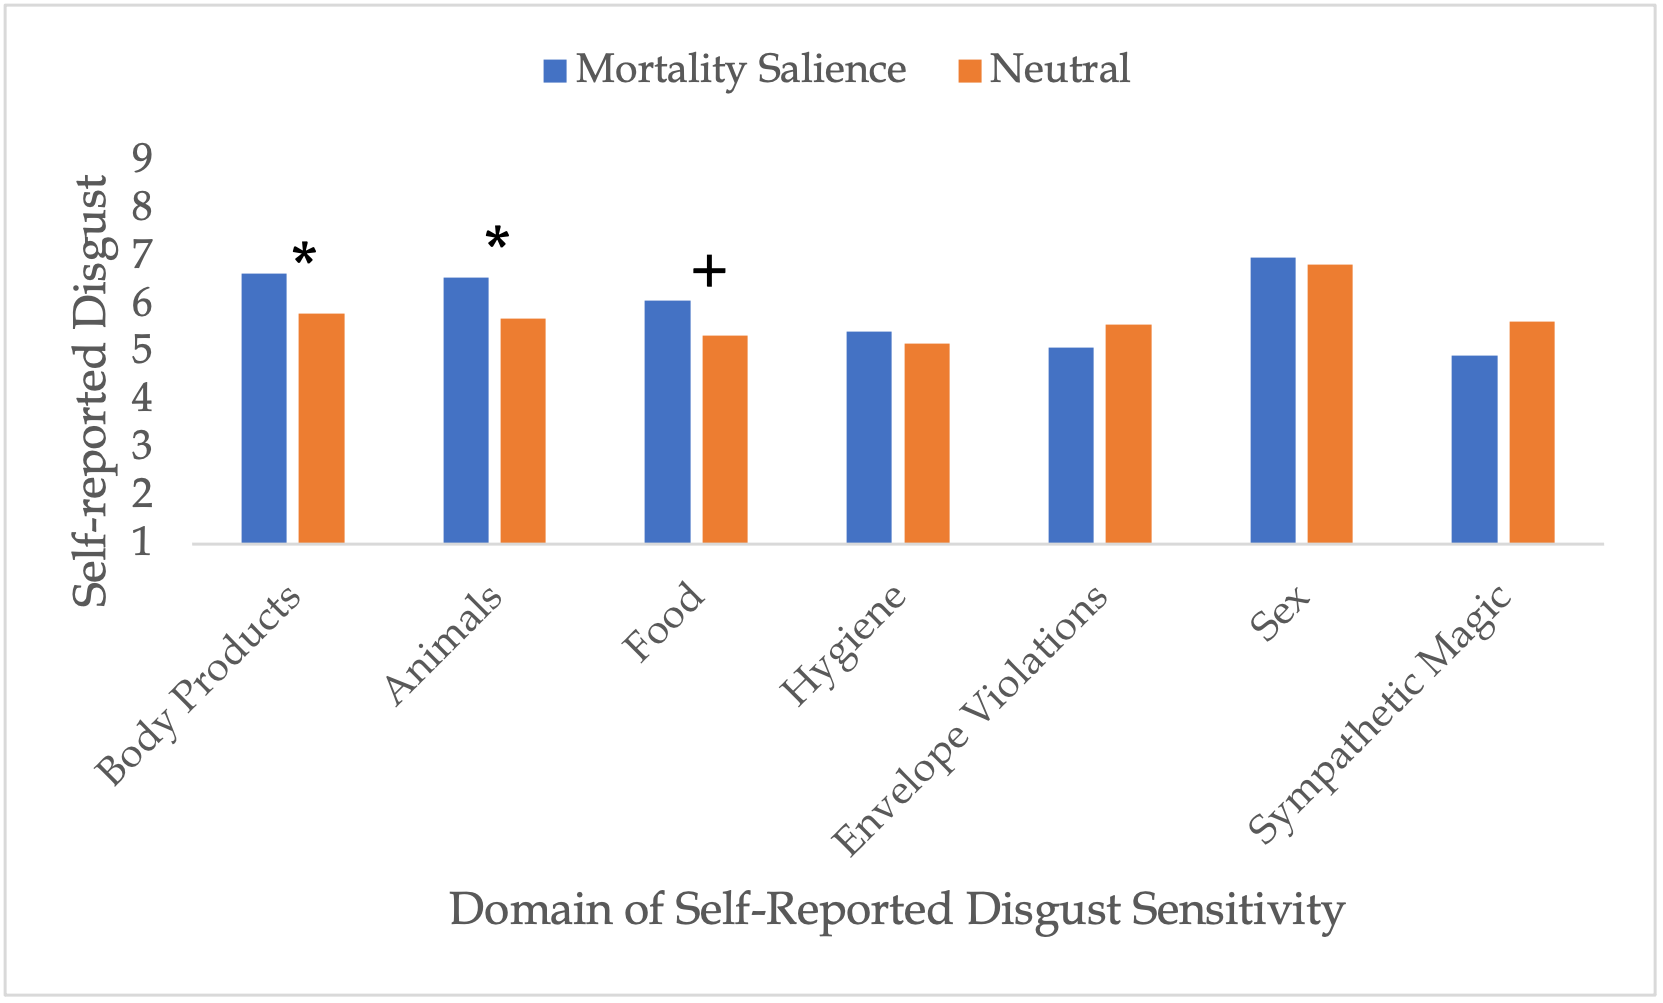 7 topics are graphed on the x axis. Each of the topics has a pair of bars, one for mortality salience, and one for neutral. The y axis measures self-reported disgust, starting at 1, increasing in increments of 1, to a maximum of 9.